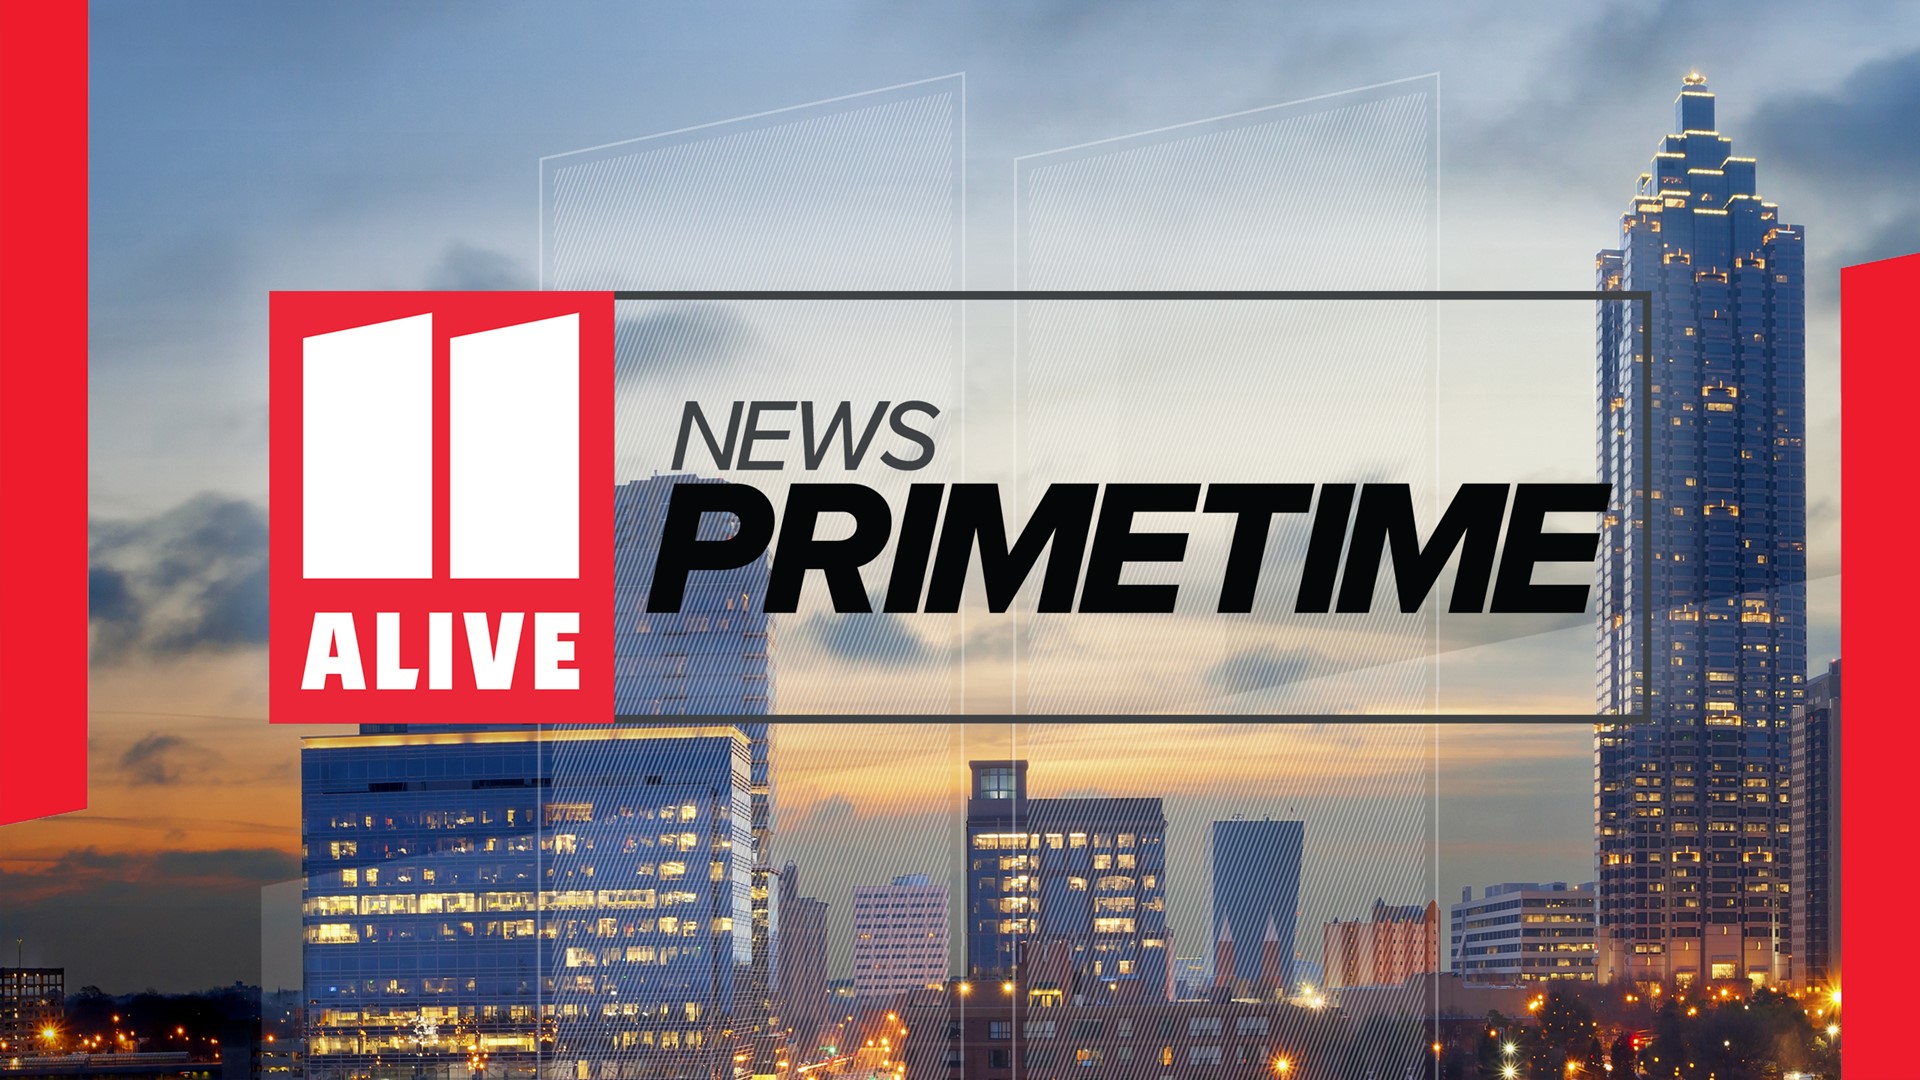 Watch metro Atlanta's only Primetime newscast for breaking news, weather and sports.